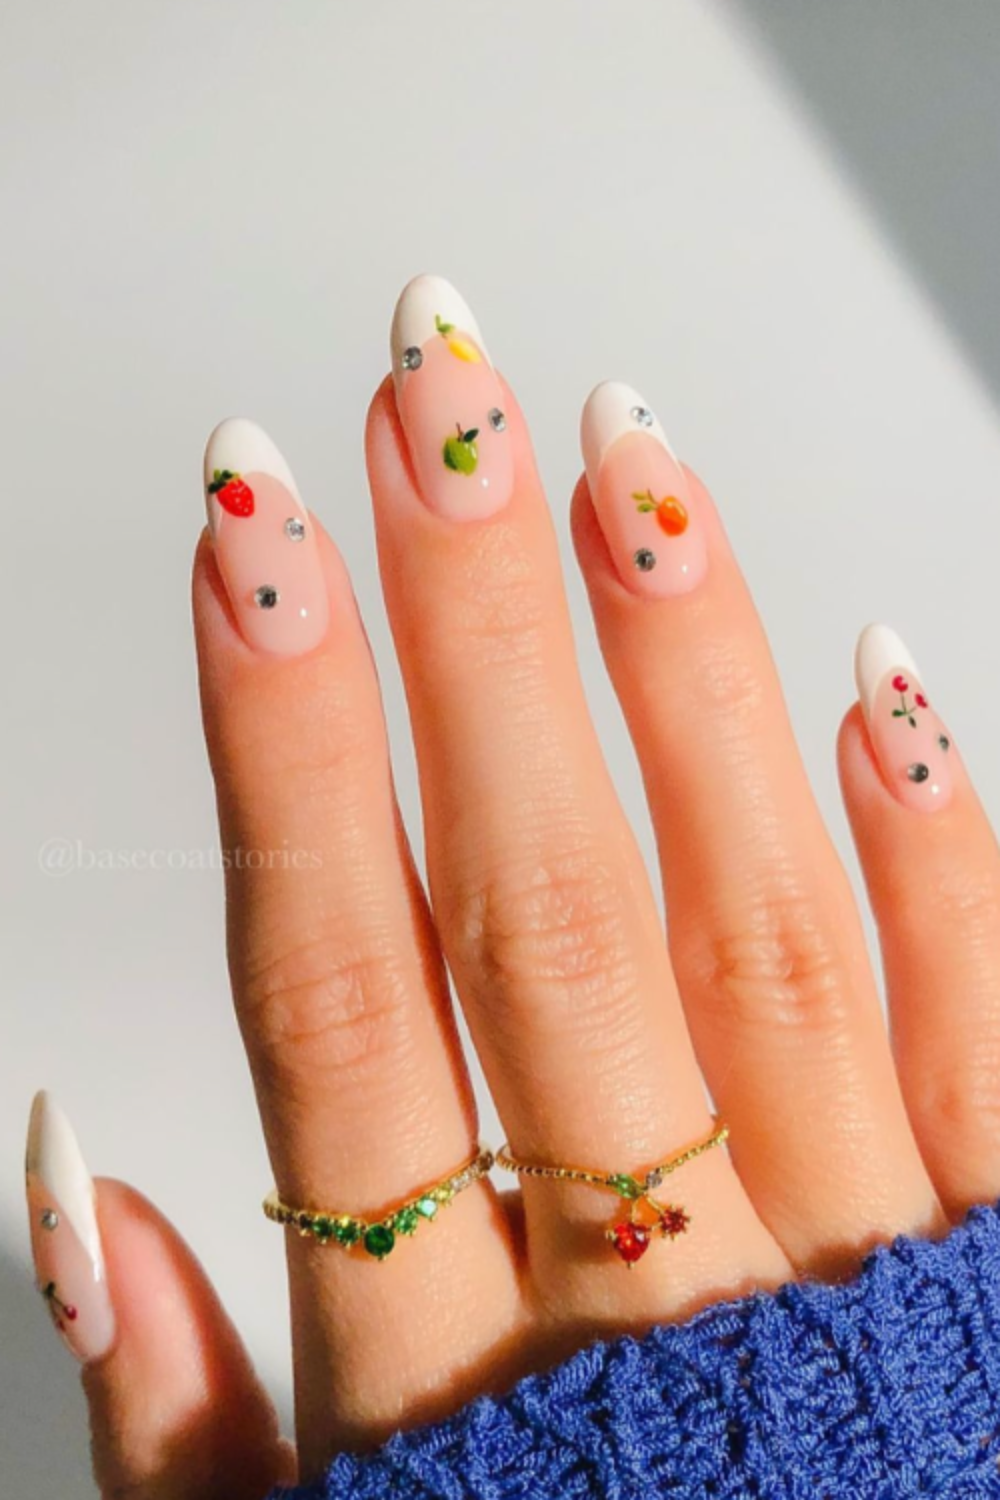 45 Fruit Nails That Are Fun and Fabulous for Spring & Summer!